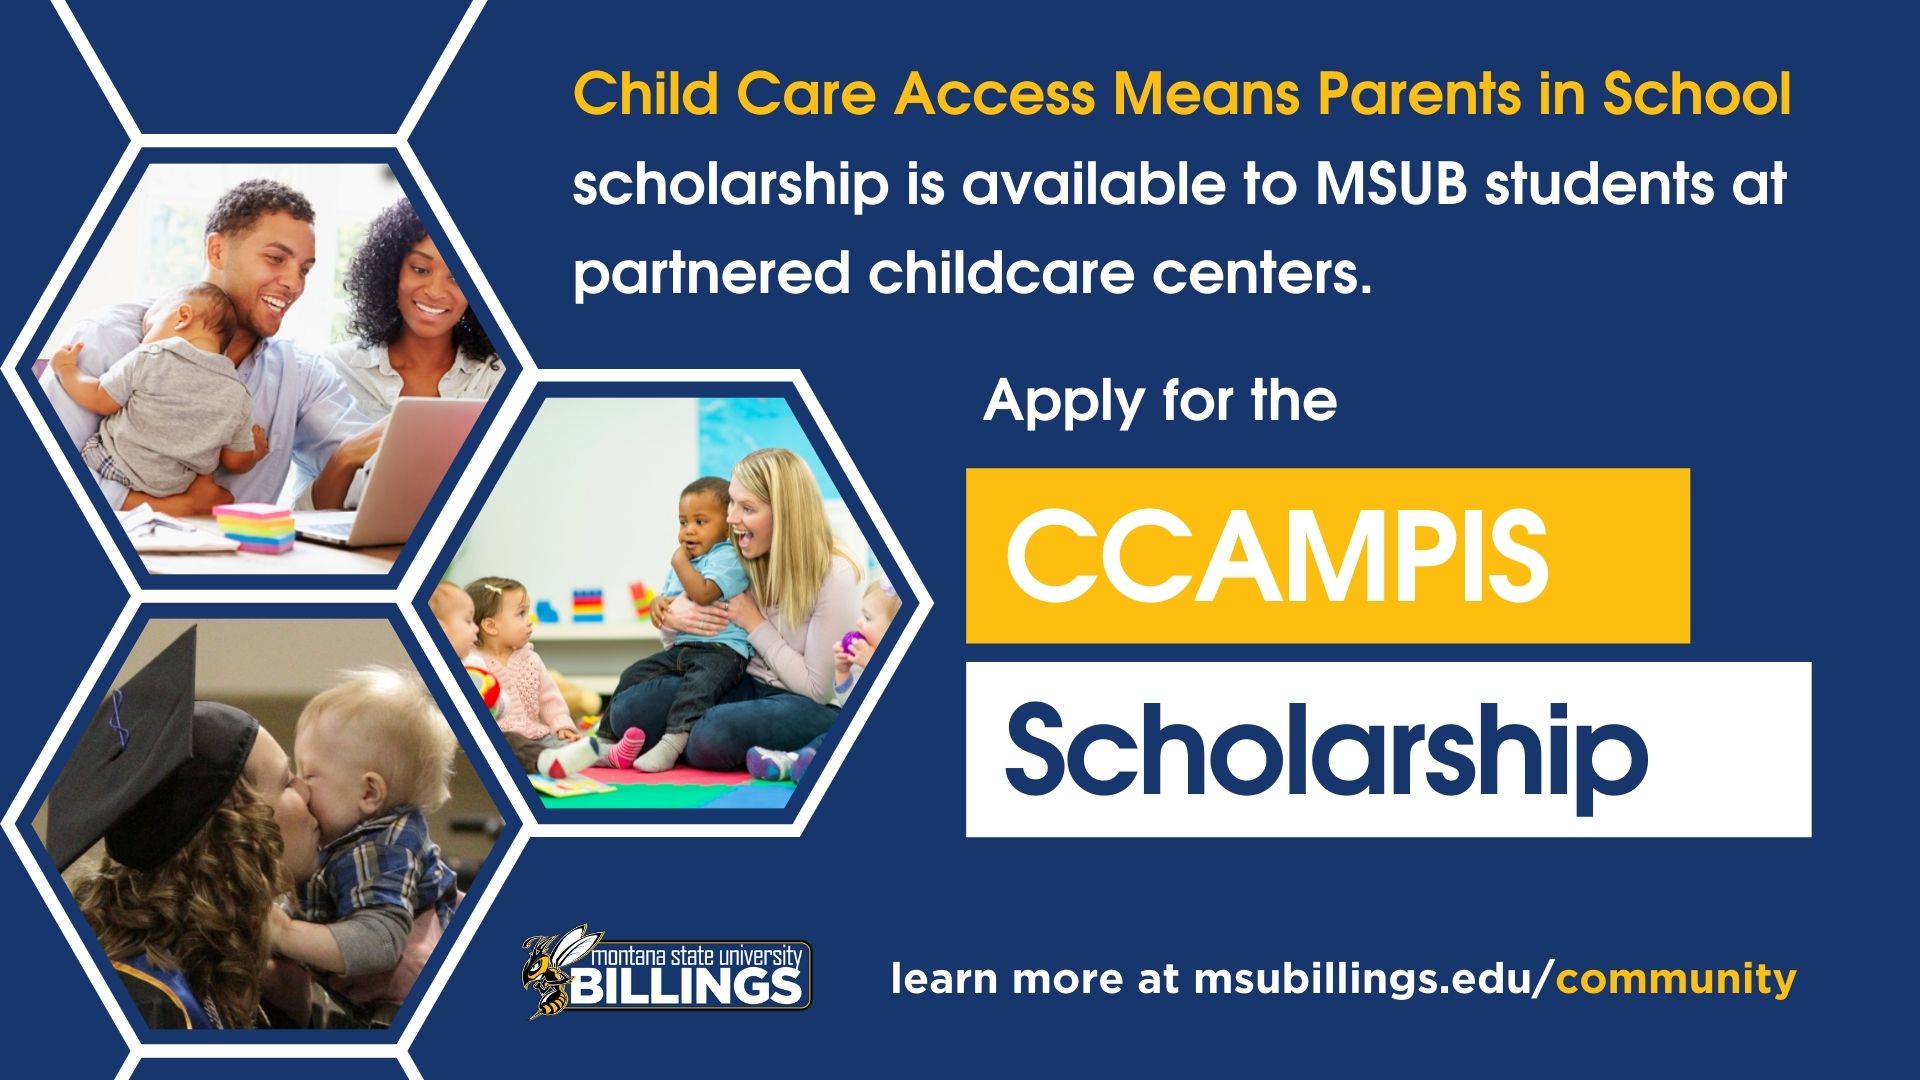 Apply for the CCAMPIS Scholarship. The Child Care Access Means Parents in School (CCAMPIS) scholarship is available to MSU Billings students at partnered childcare centers.